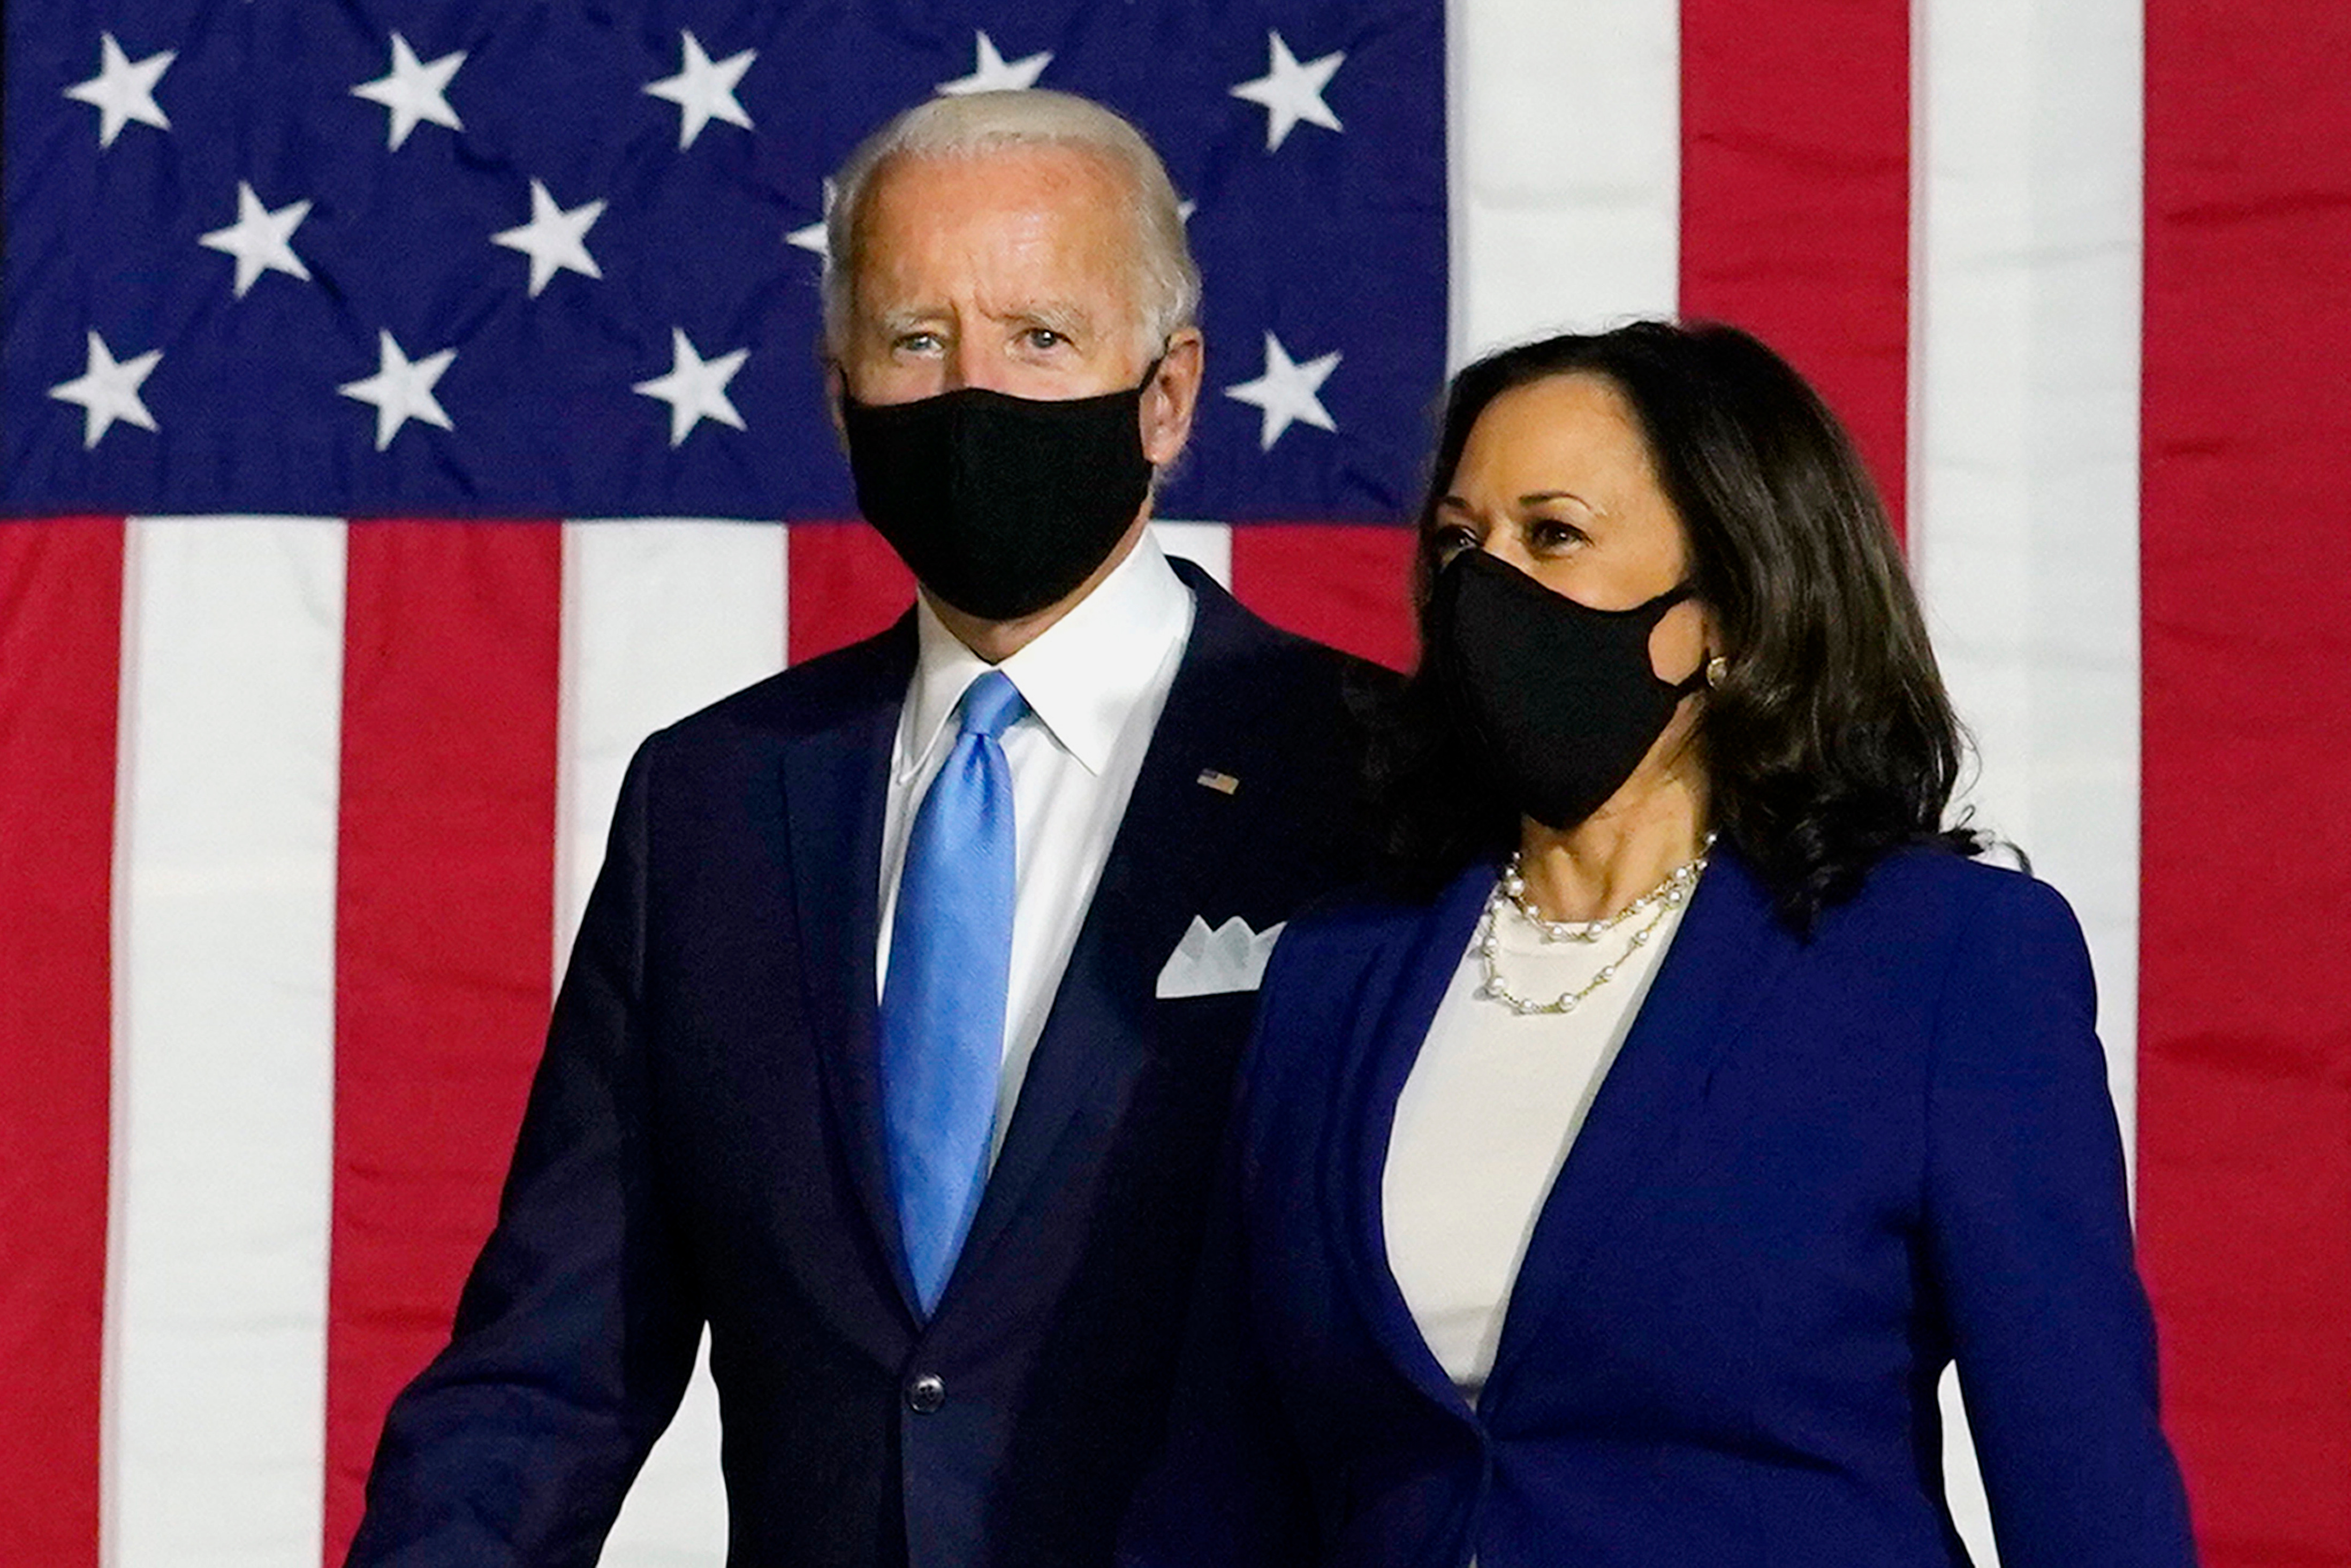 Joe Biden and Kamala Harris arrive at a news conference in Wilmington, Delaware on August 12, 2020. Trump also unleashed on Biden and Harris